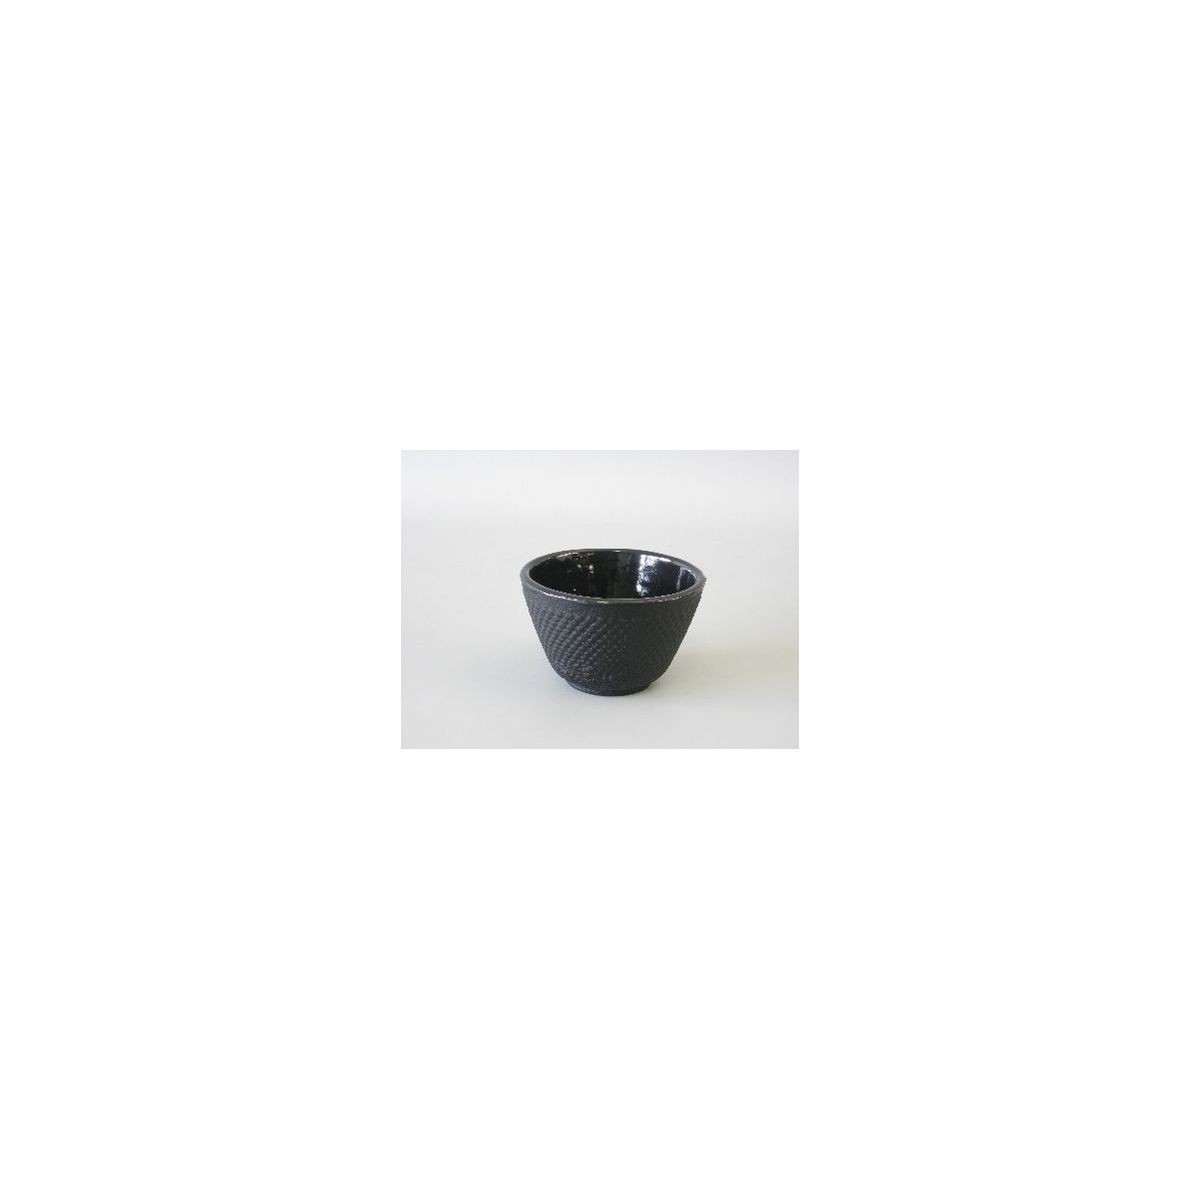 TASSE A THE FONTE EMAILLEE GRENELEE NOIR MAT 12CL